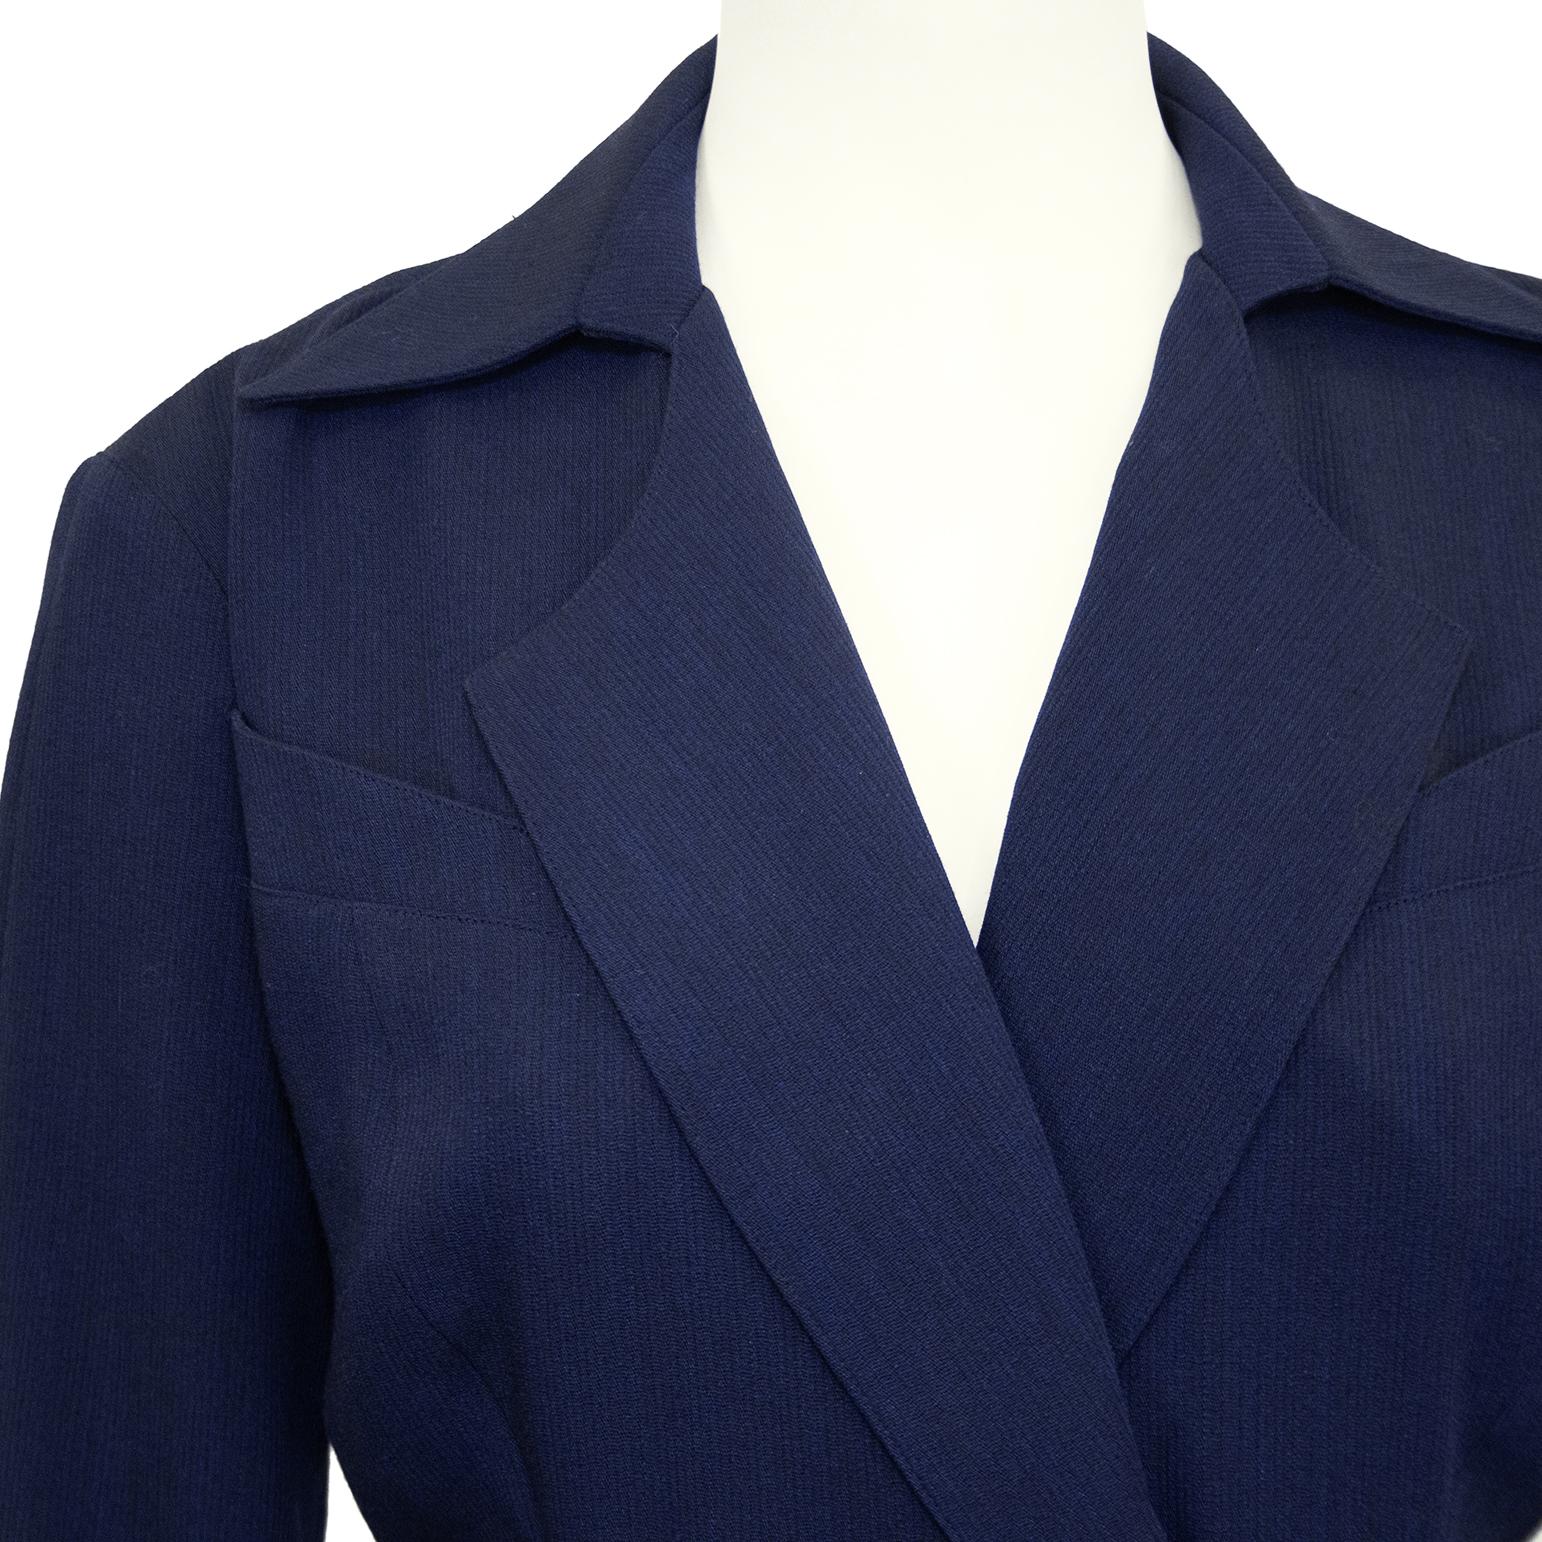 Late 1980s Thierry Mugler Navy Wool Double Breasted Coat Dress For Sale 1